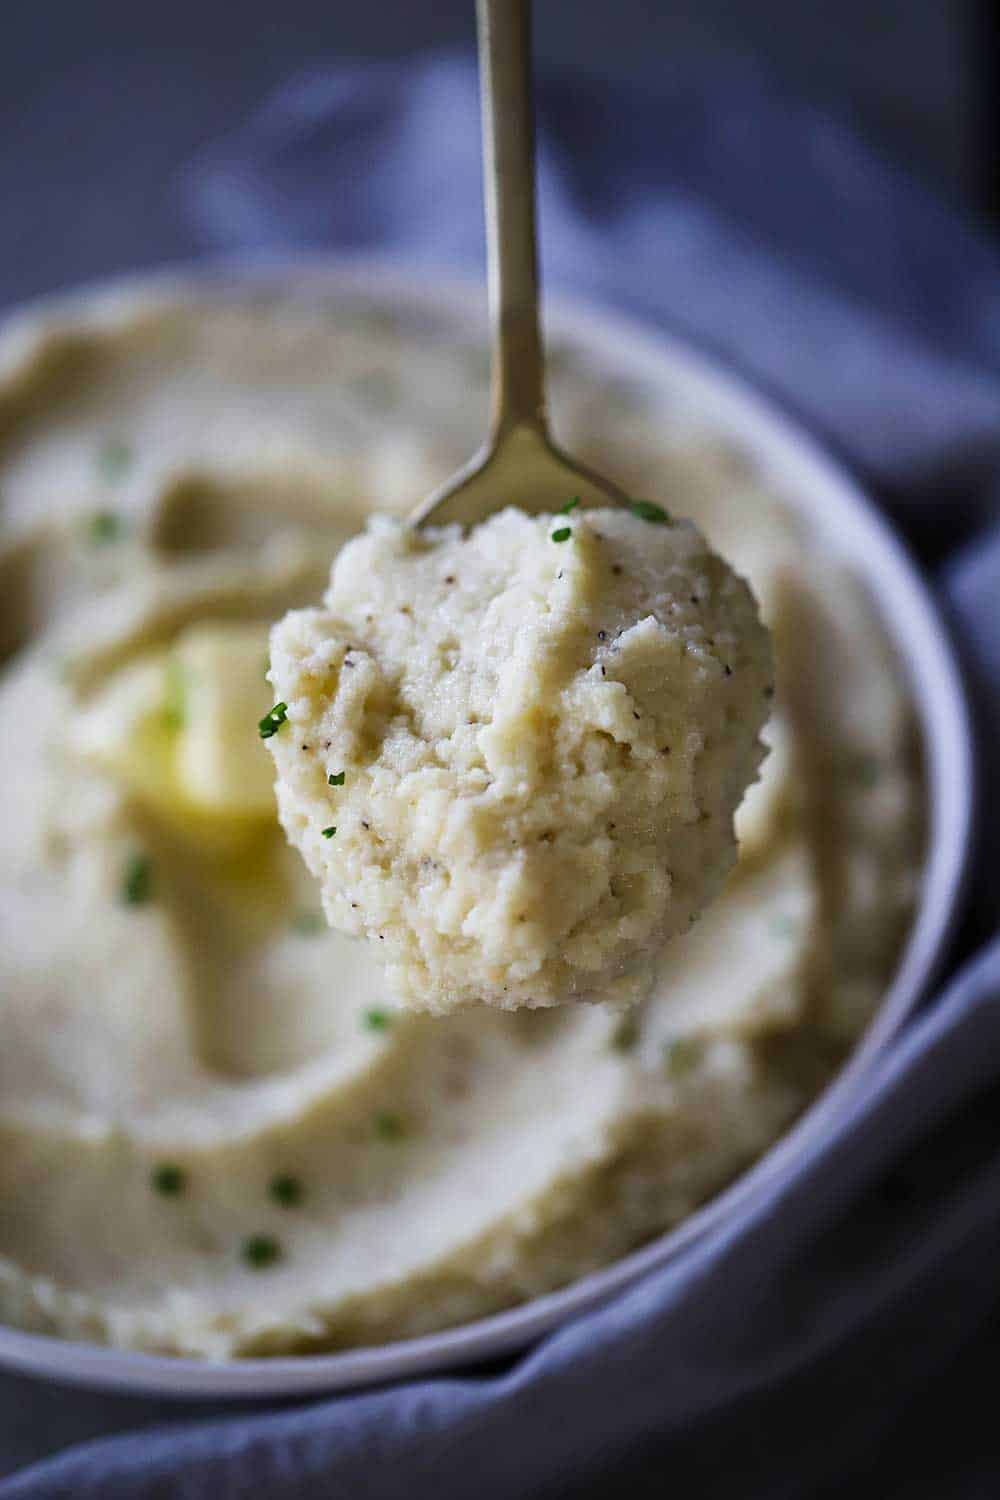 A serving spoon being lifted up filled with a helping of mashed cauliflower and roasted garlic over a bowl filled with the same. 